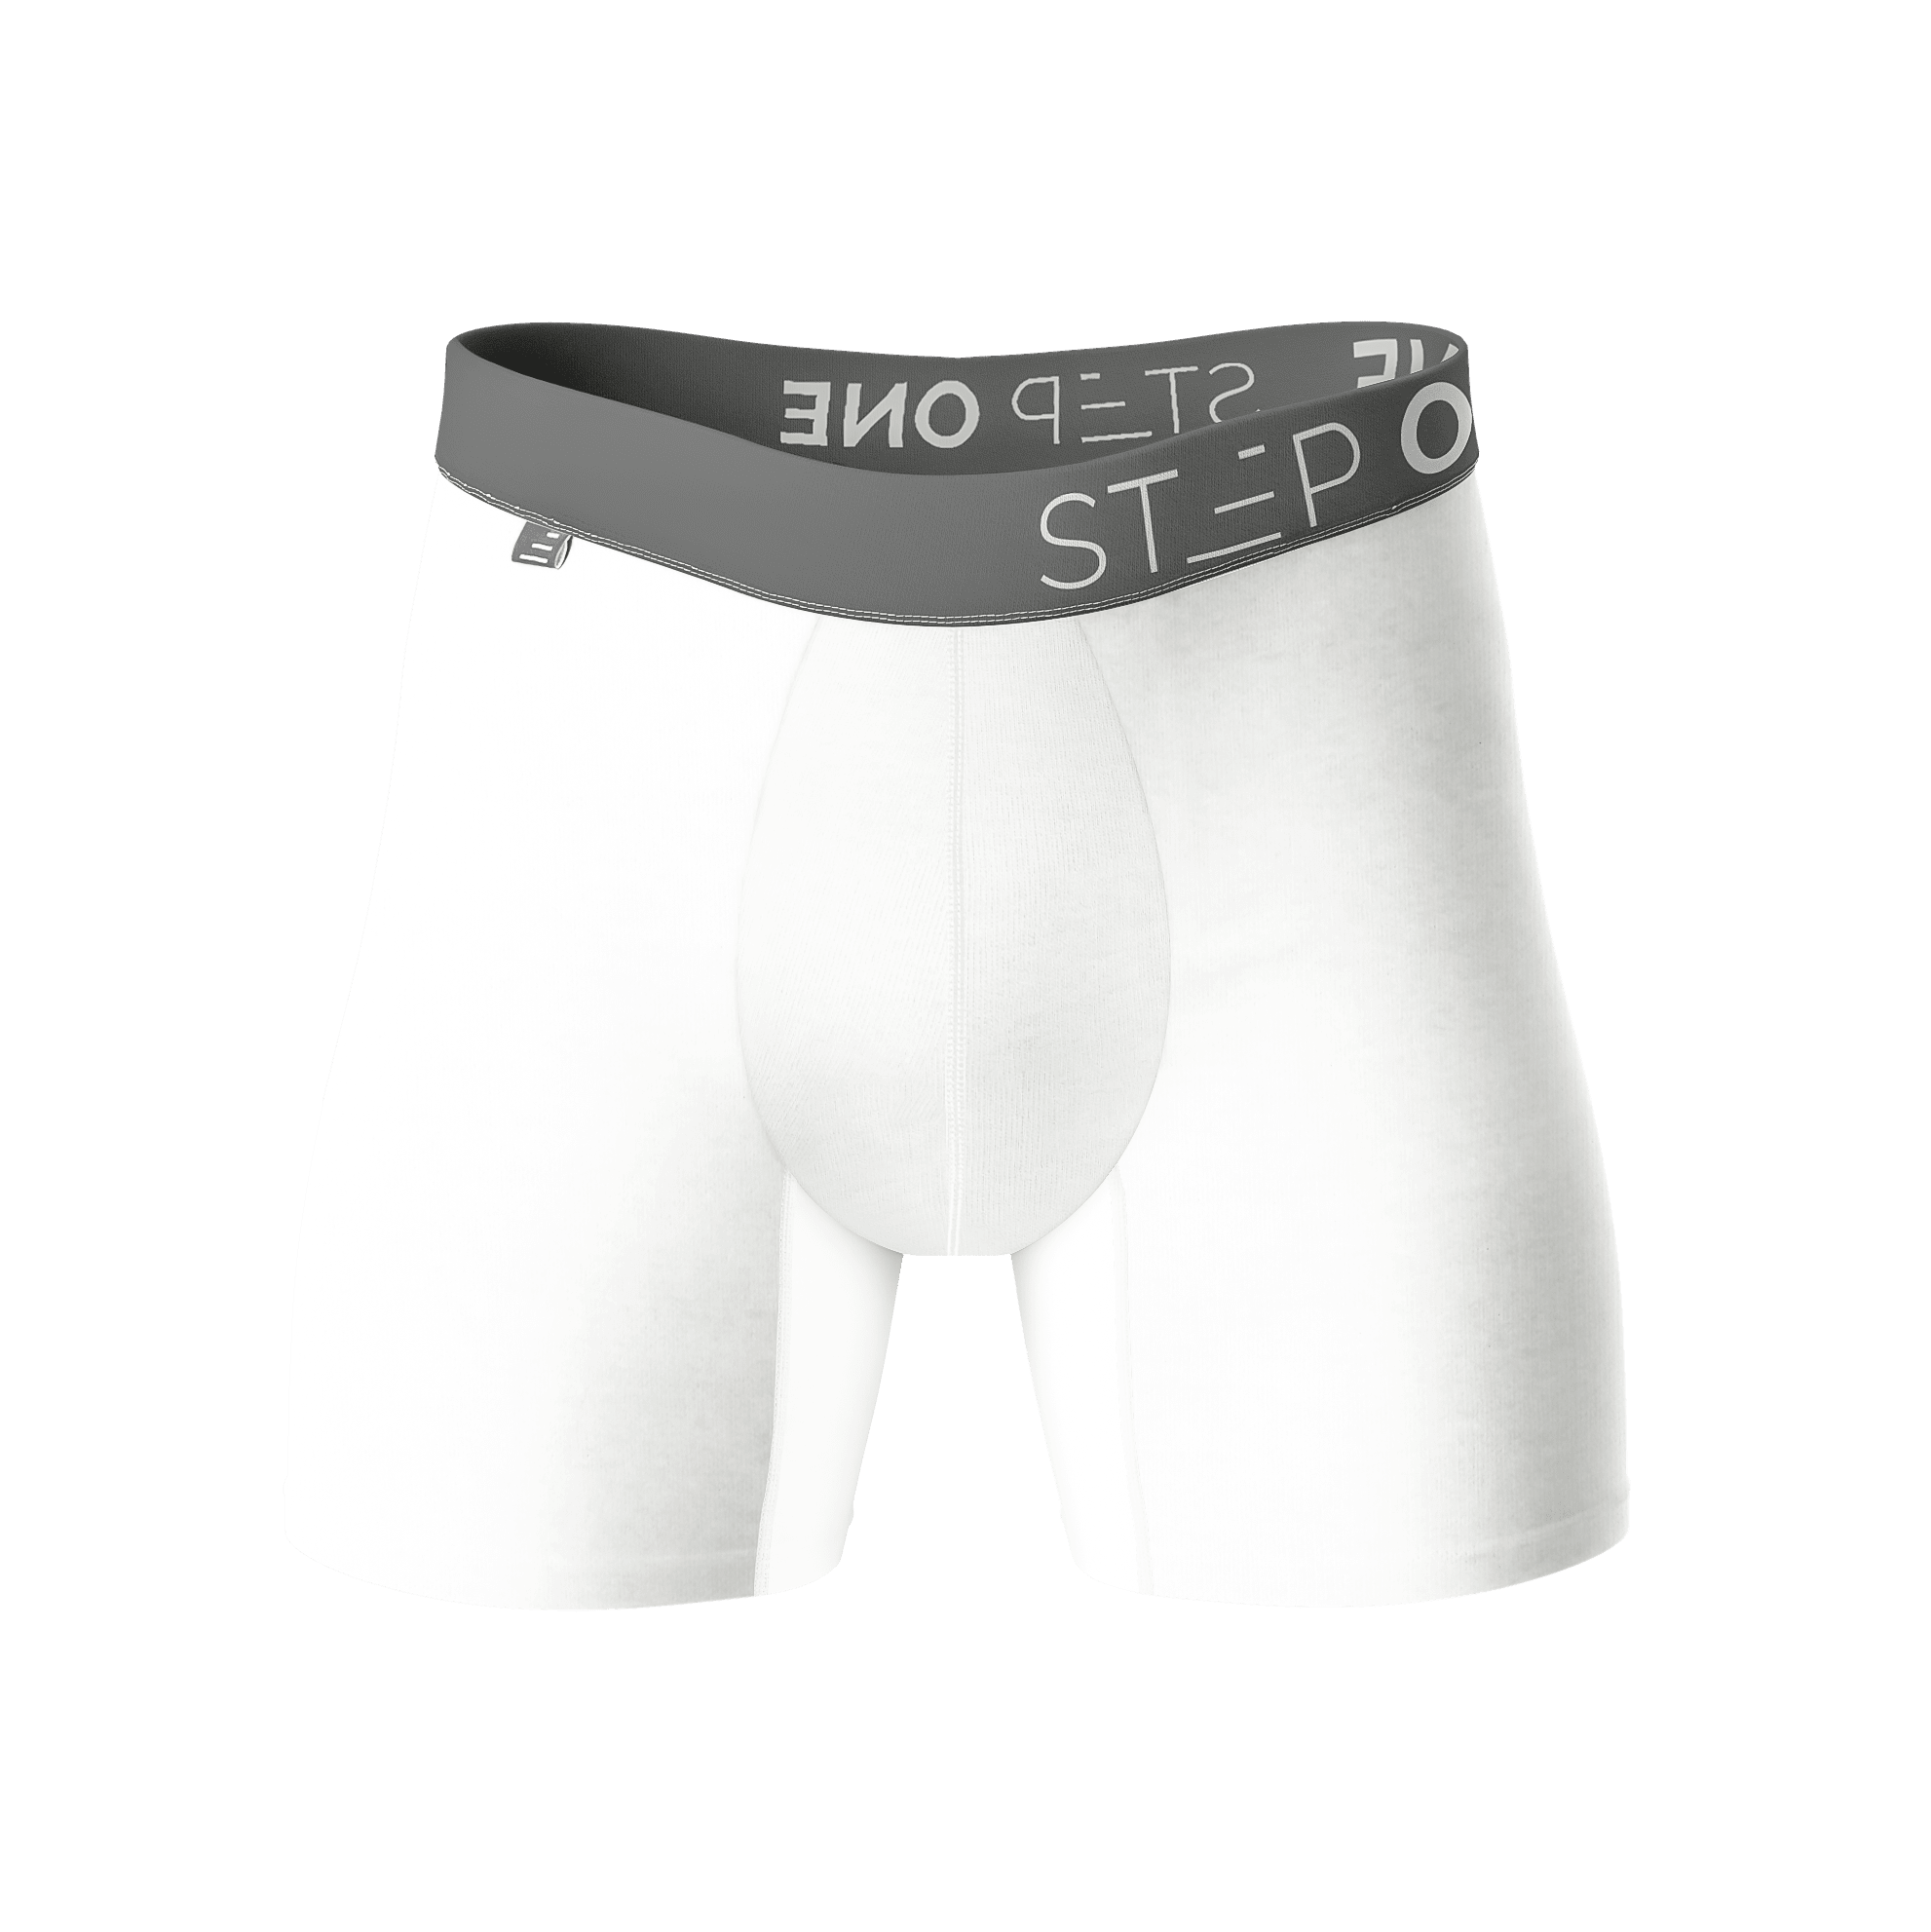 STEP ONE New Mens Trunks (Shorter) Bamboo Underwear- Limited Editions